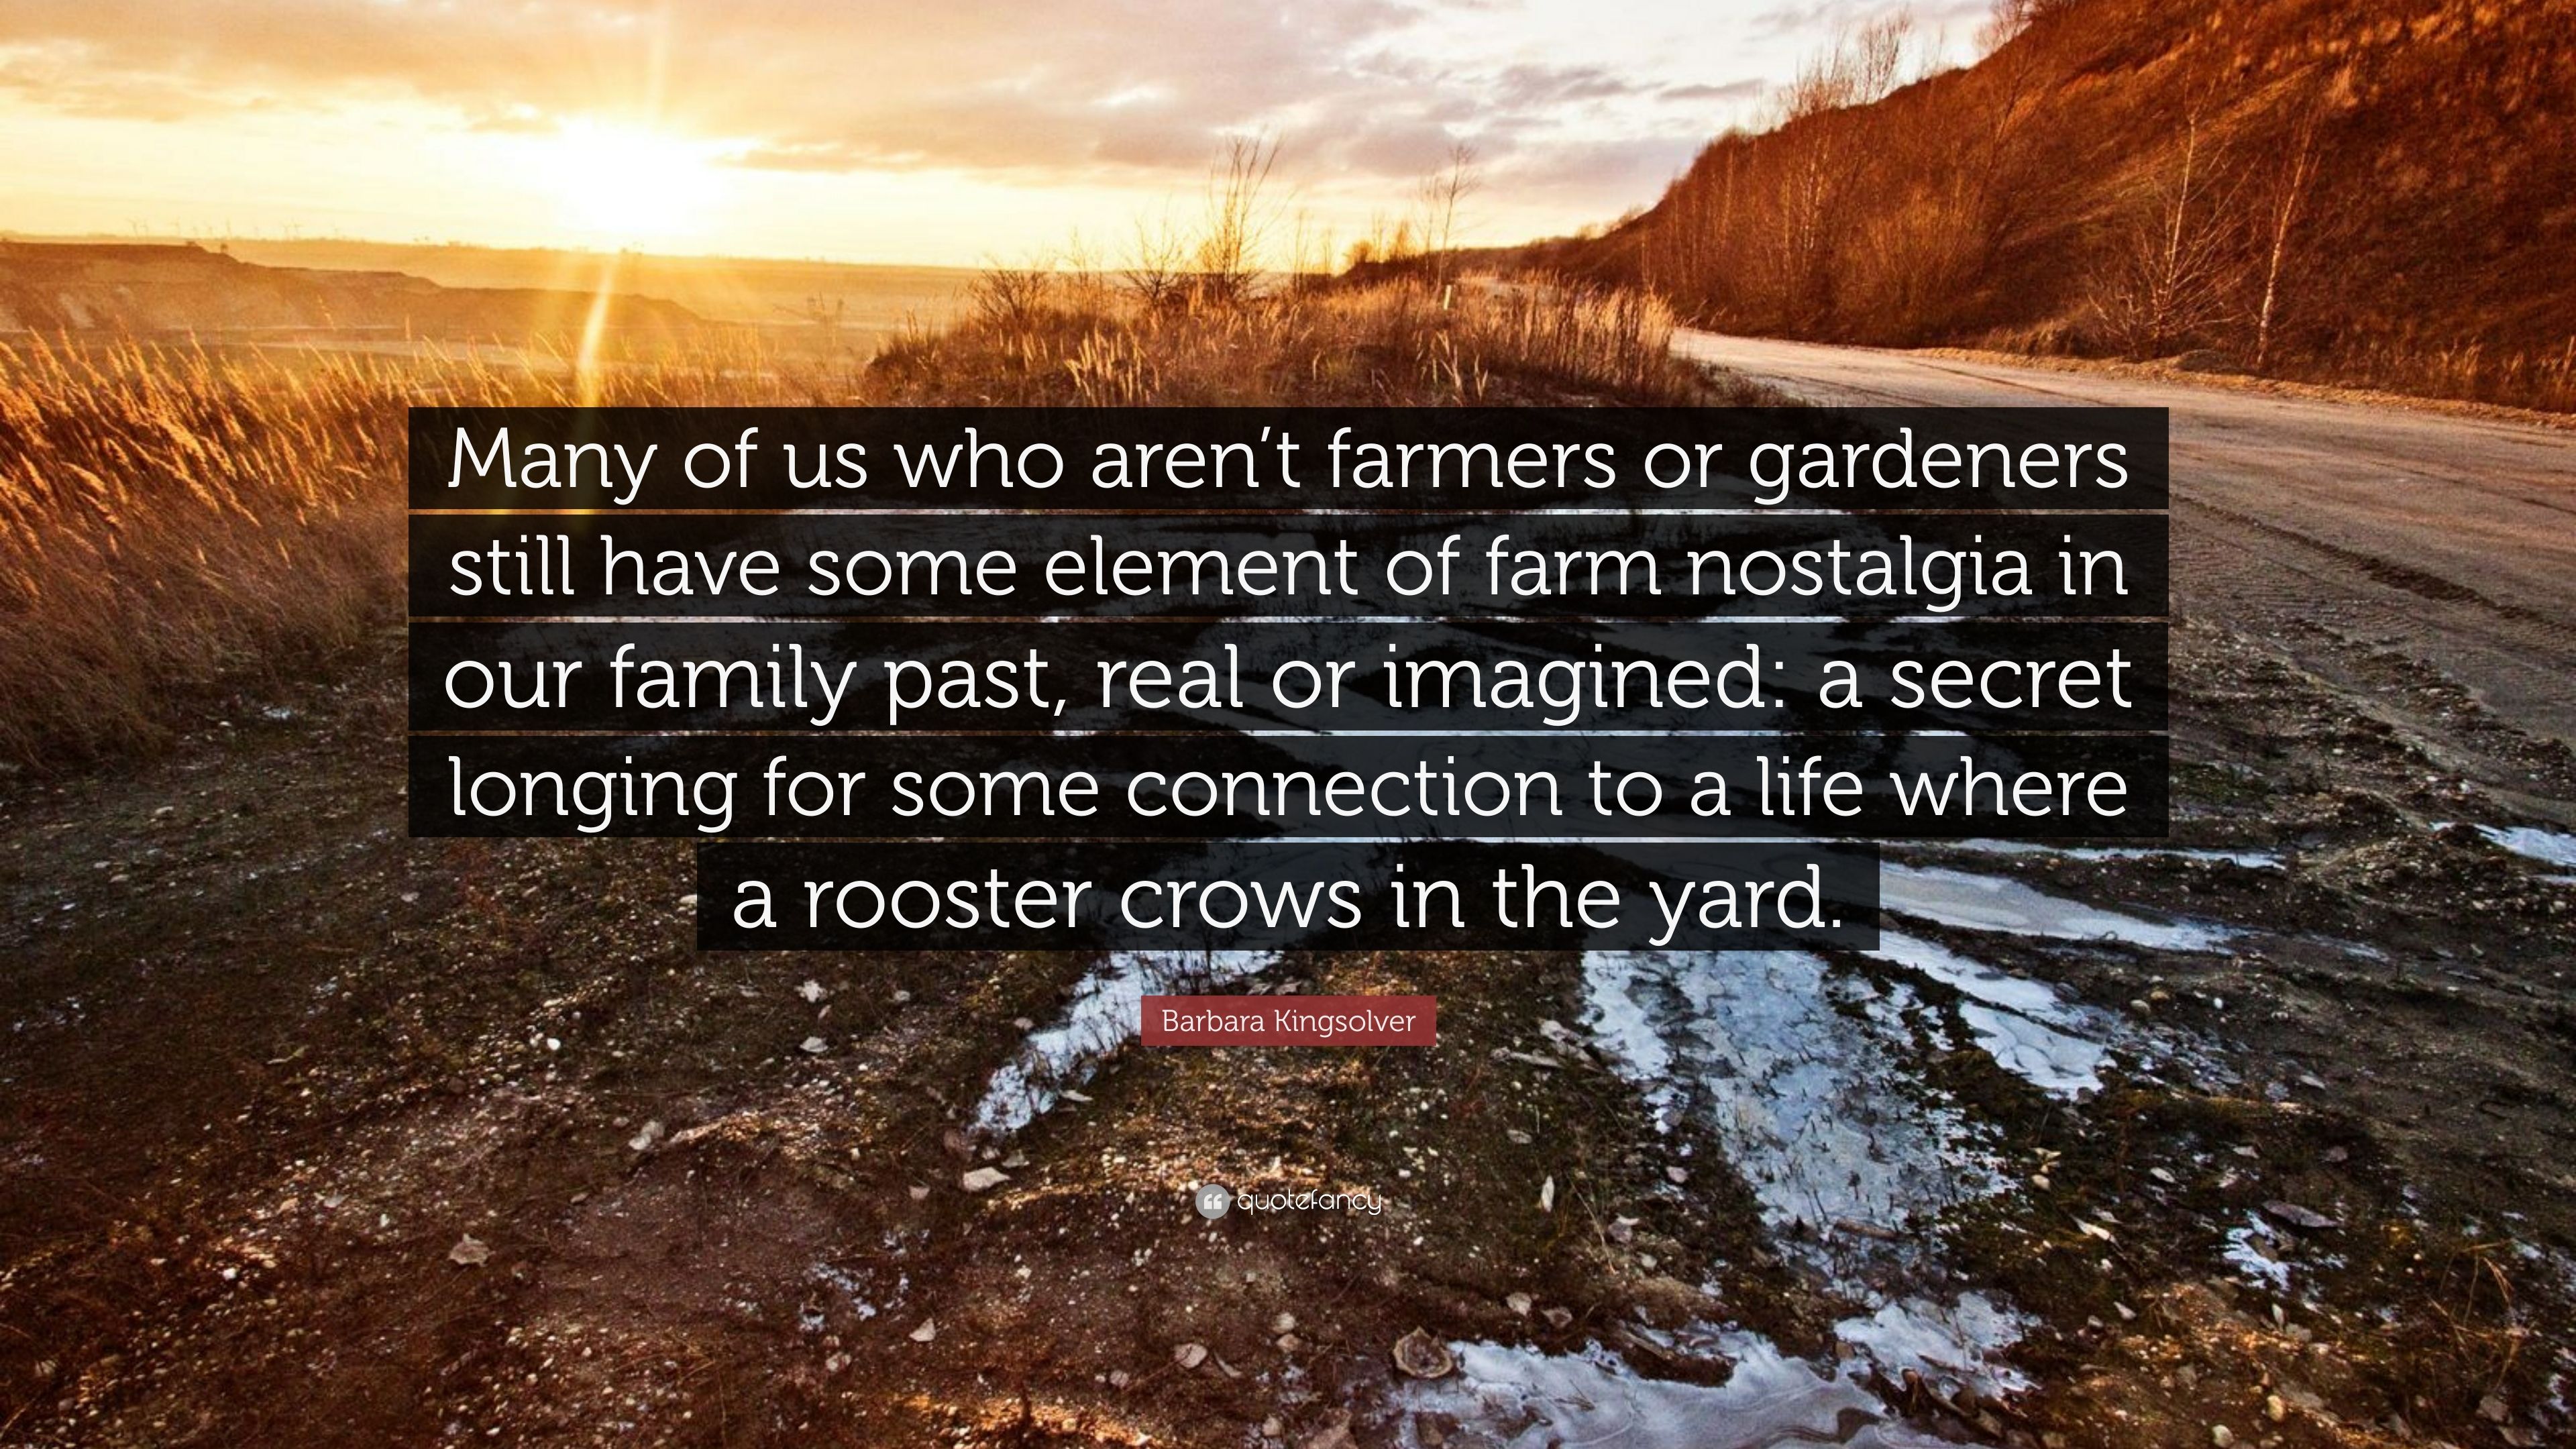 Barbara Kingsolver Quote: “Many of us who aren't farmers or